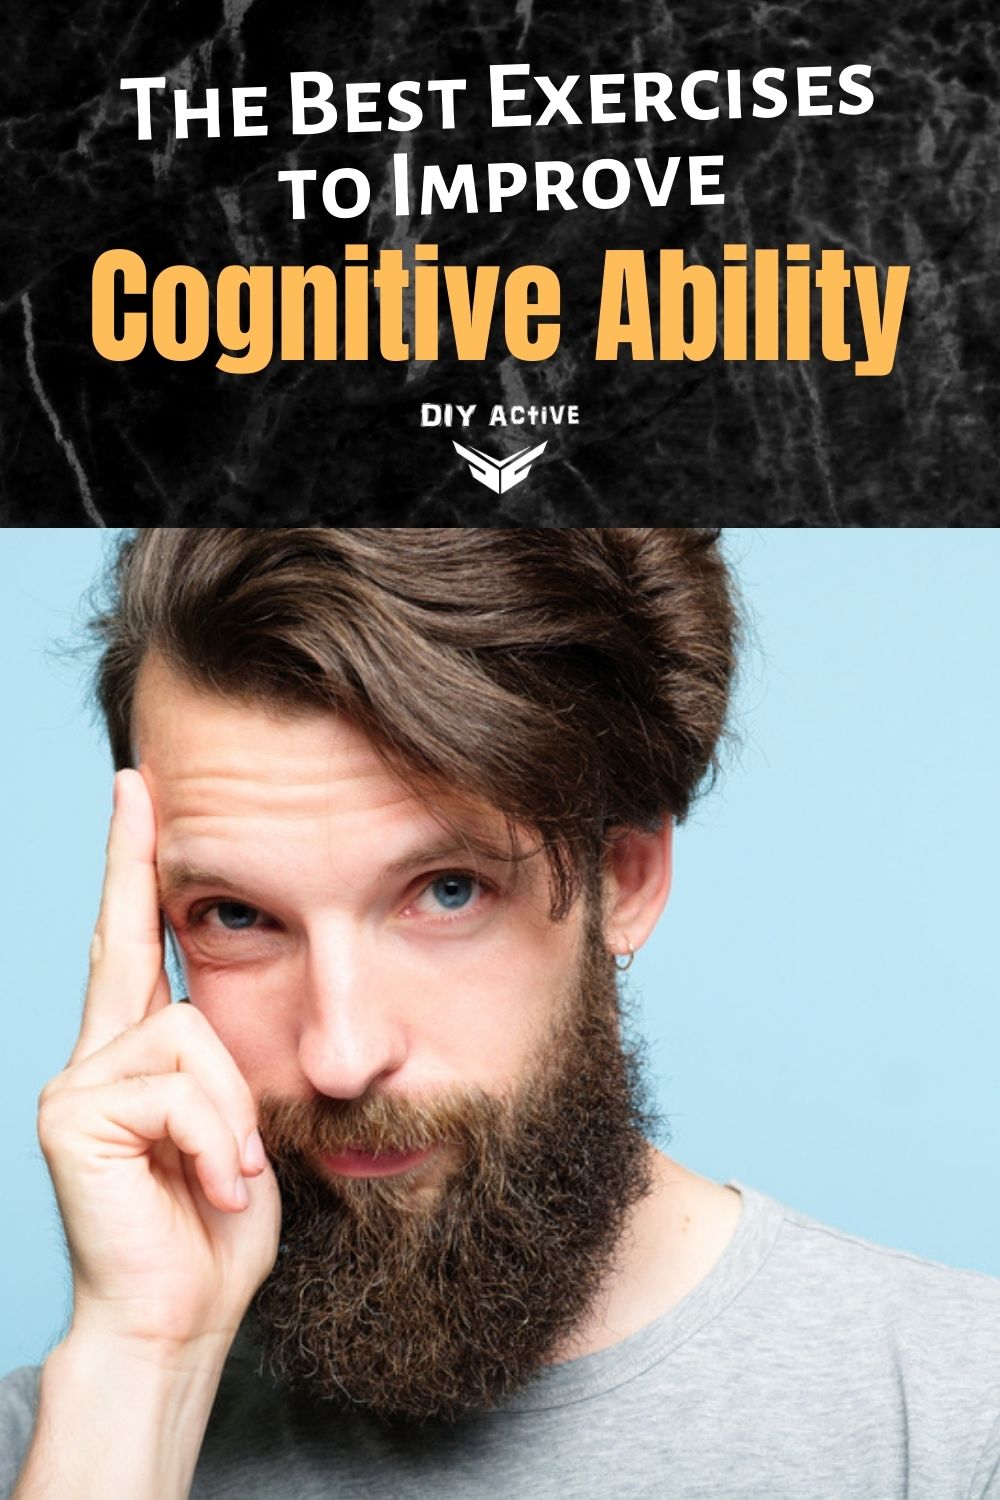 The Best Exercises to Improve Cognitive Ability Post-Brain Injury